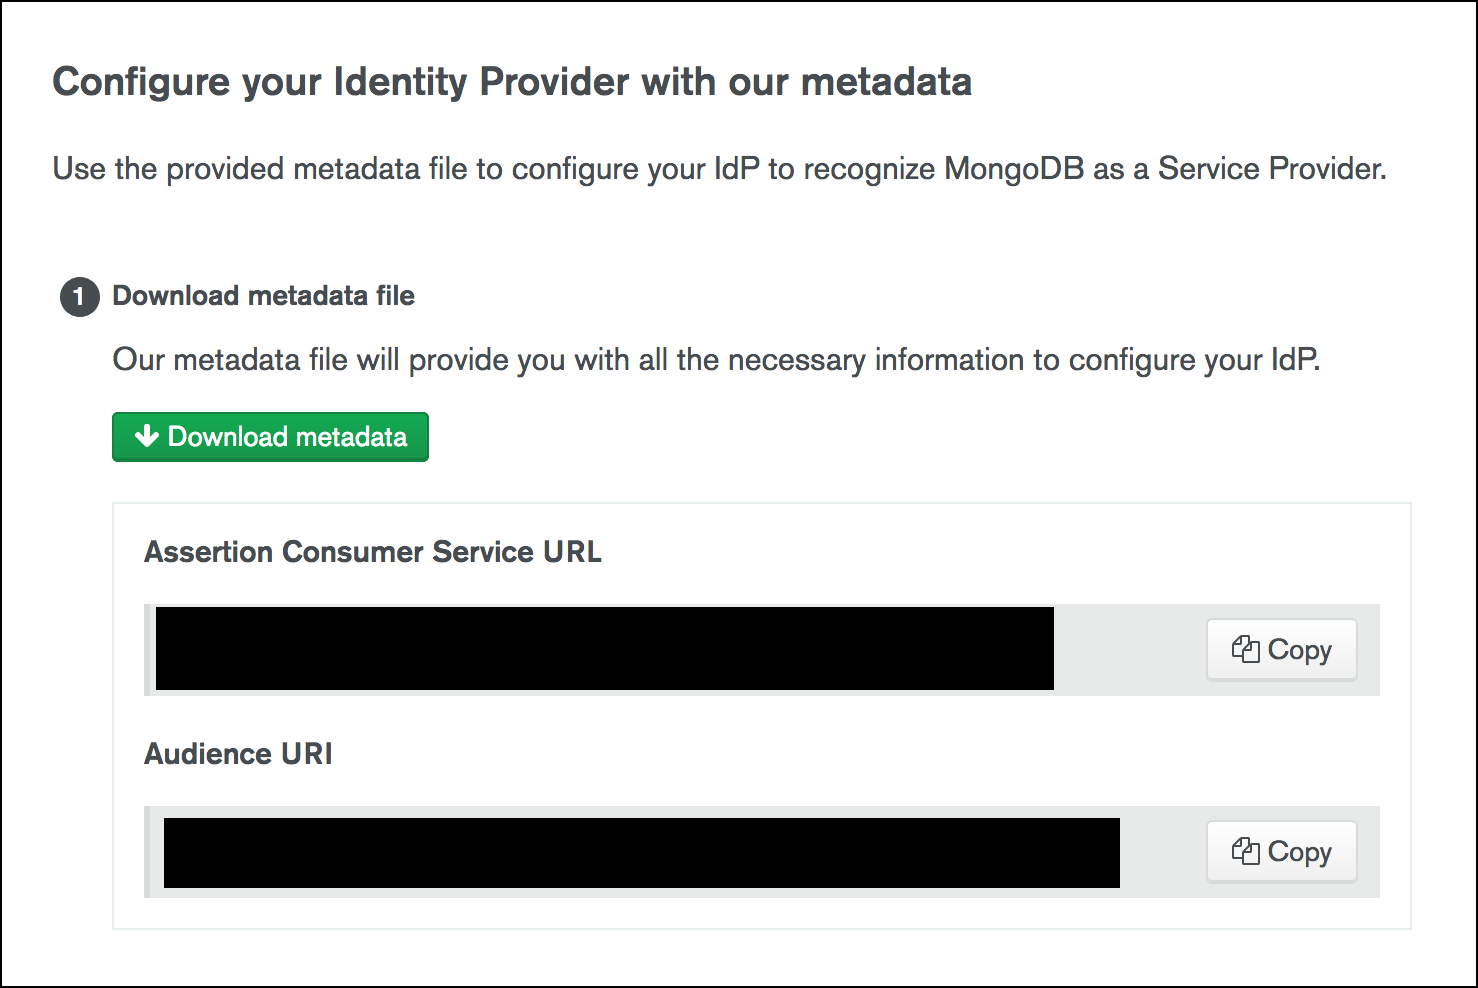 Image showing how to download metadata